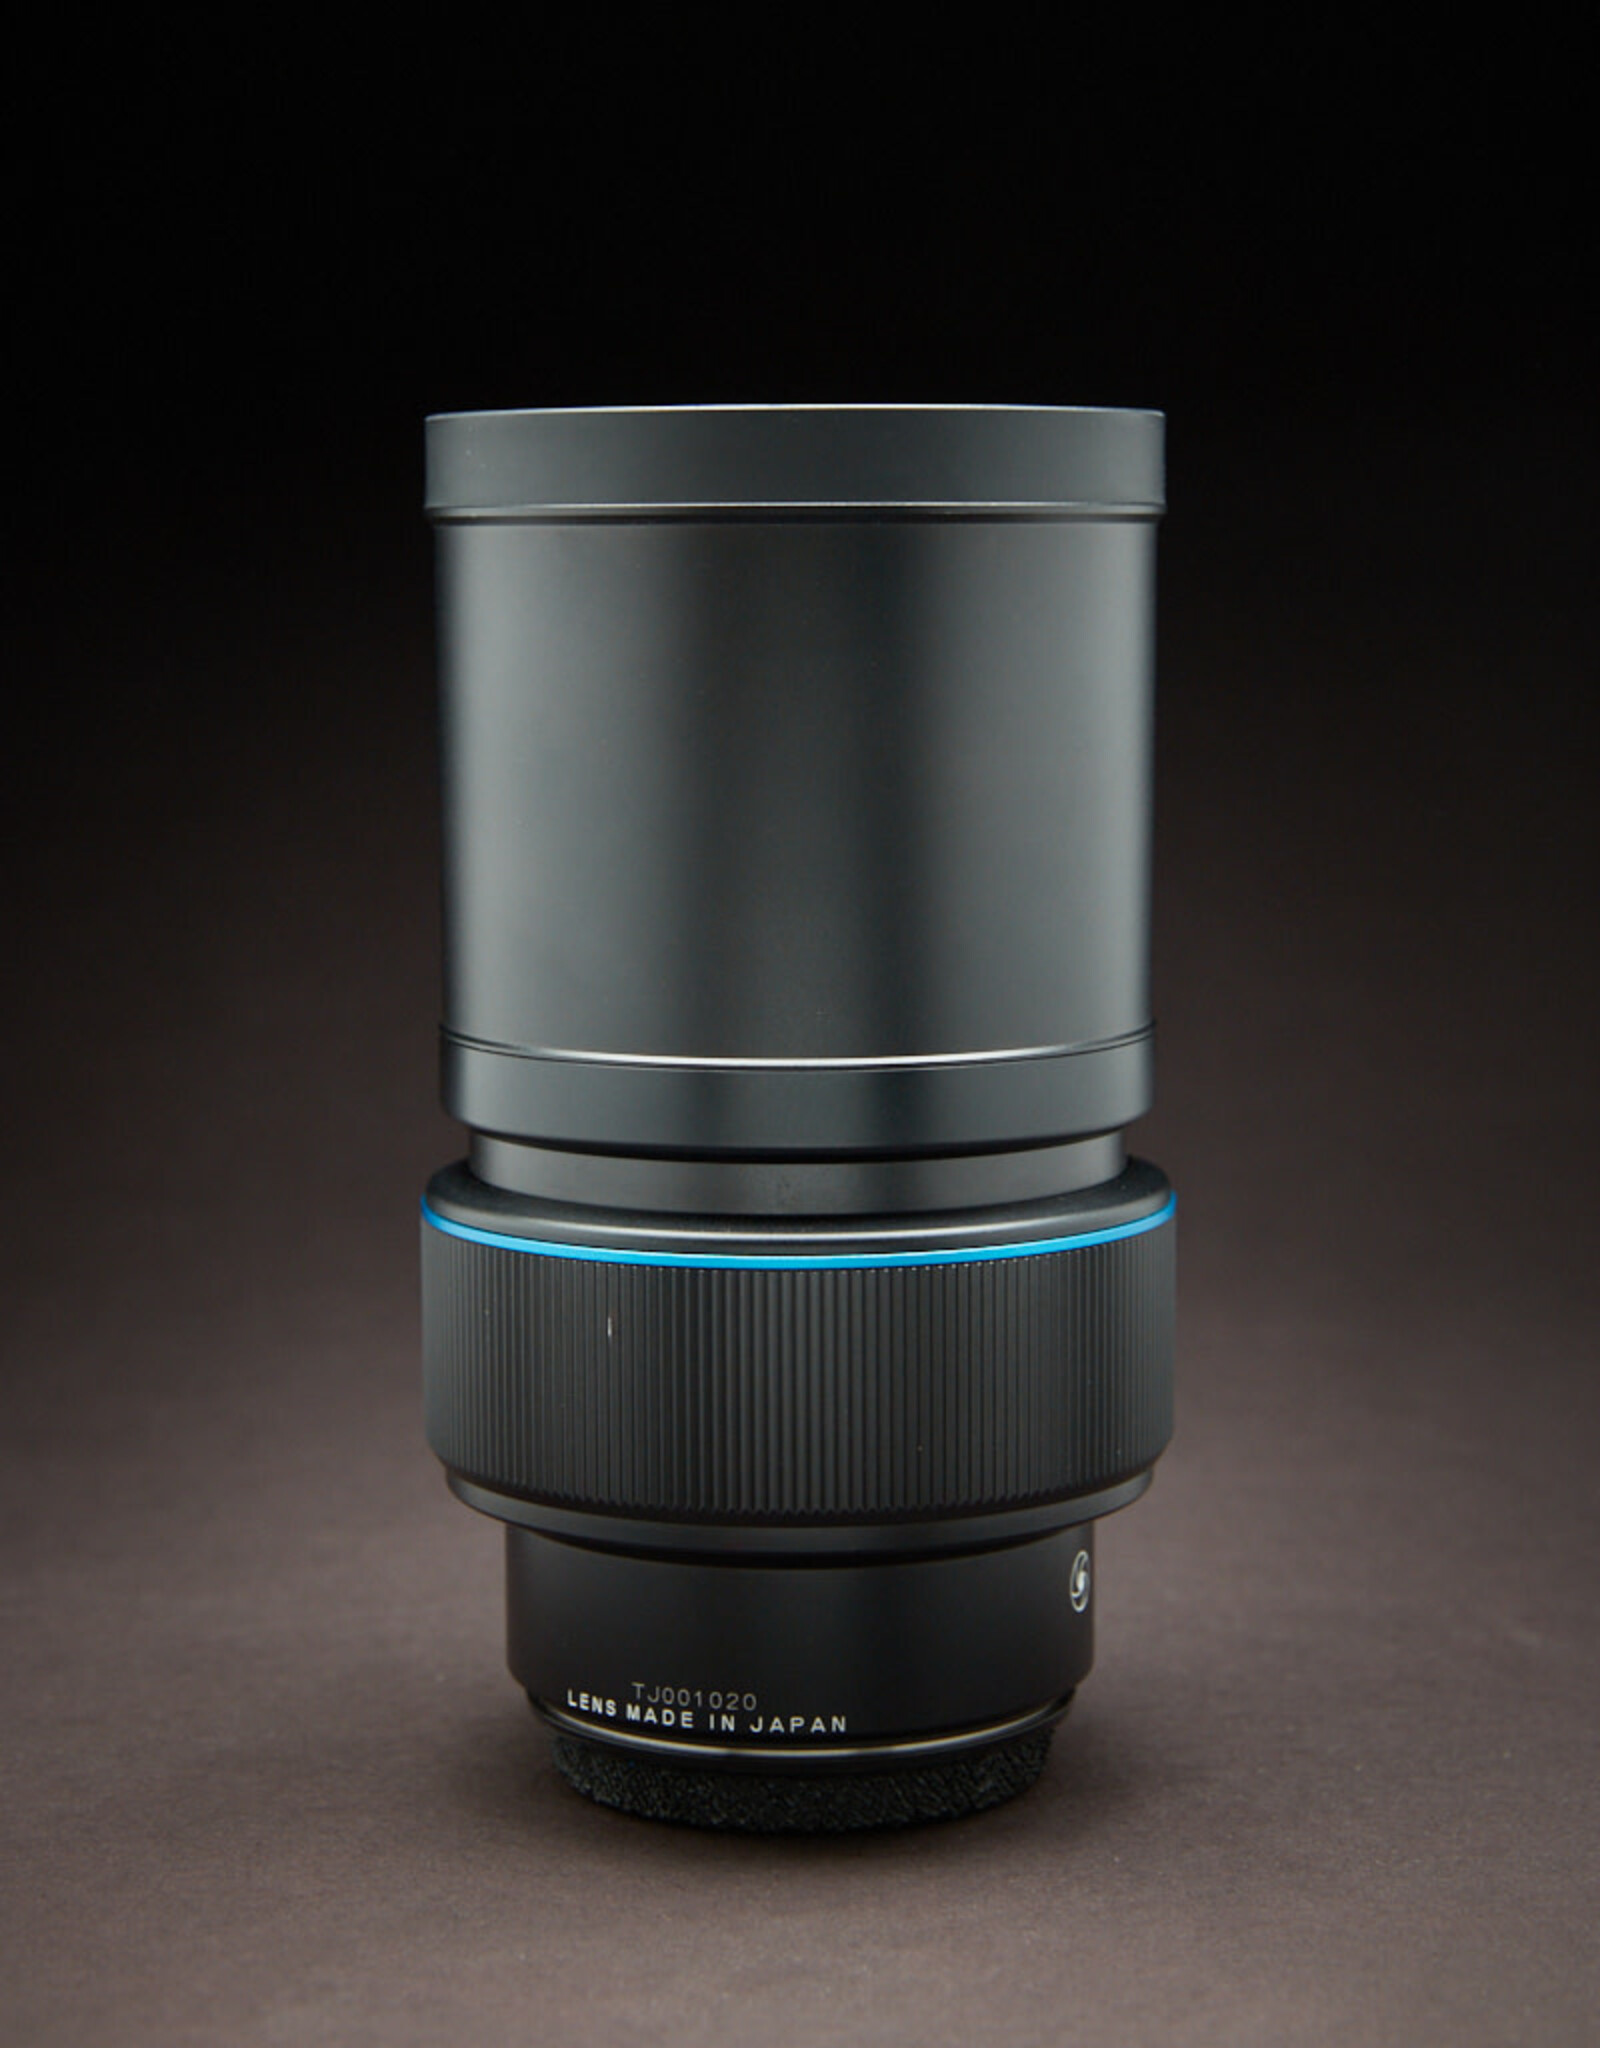 Phase One USED - Phase One Schneider Kreuznach 240mm 4.5 Blue Ring Lens with hood, caps and original box. Condition 9.